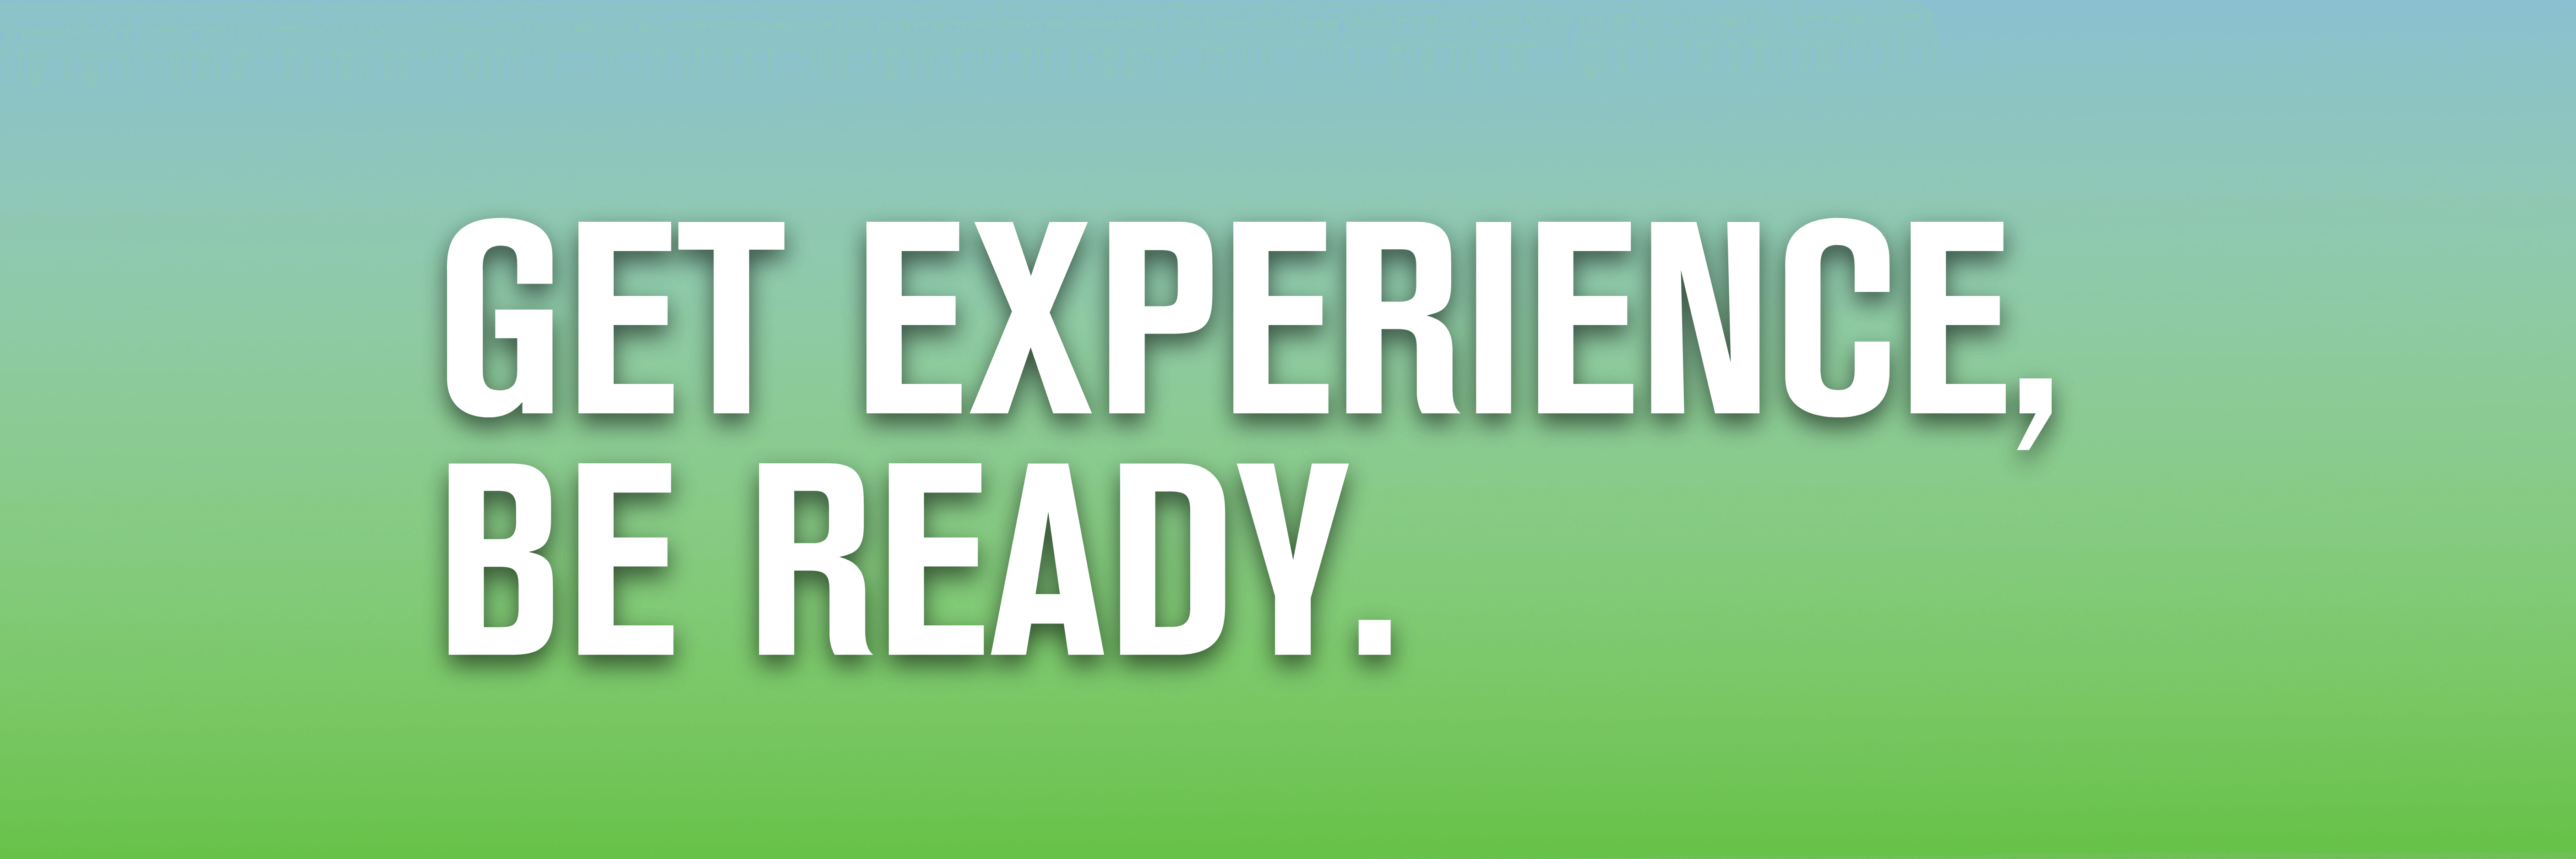 Get Experience, Be Ready